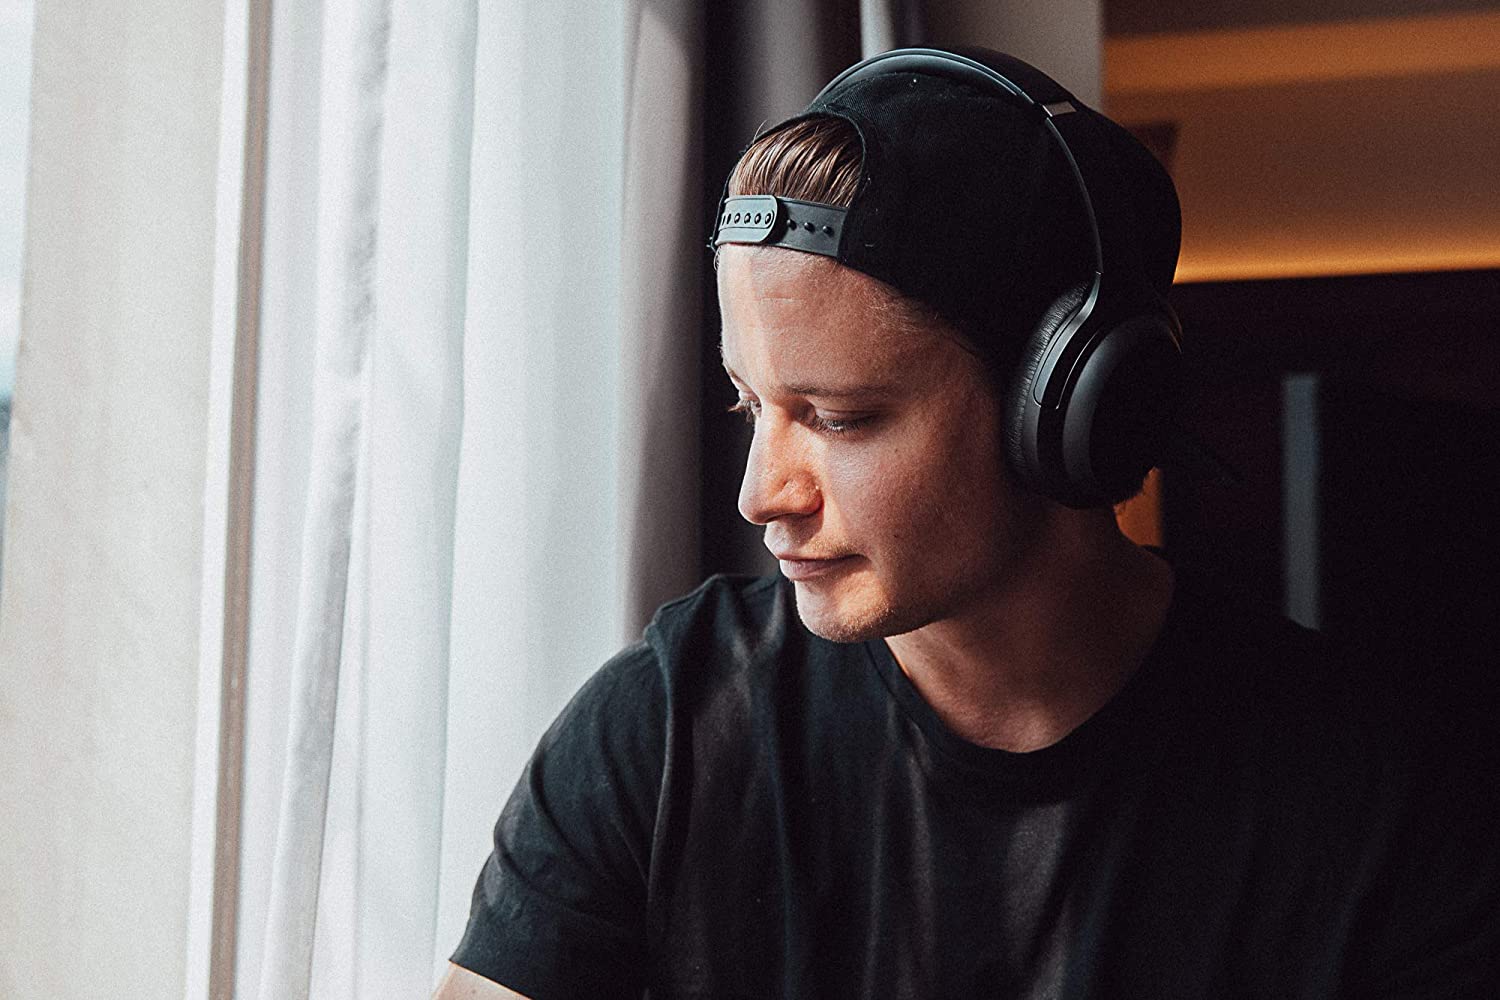 Kygo’s top-end afforable ANC headphones – A11/800 review